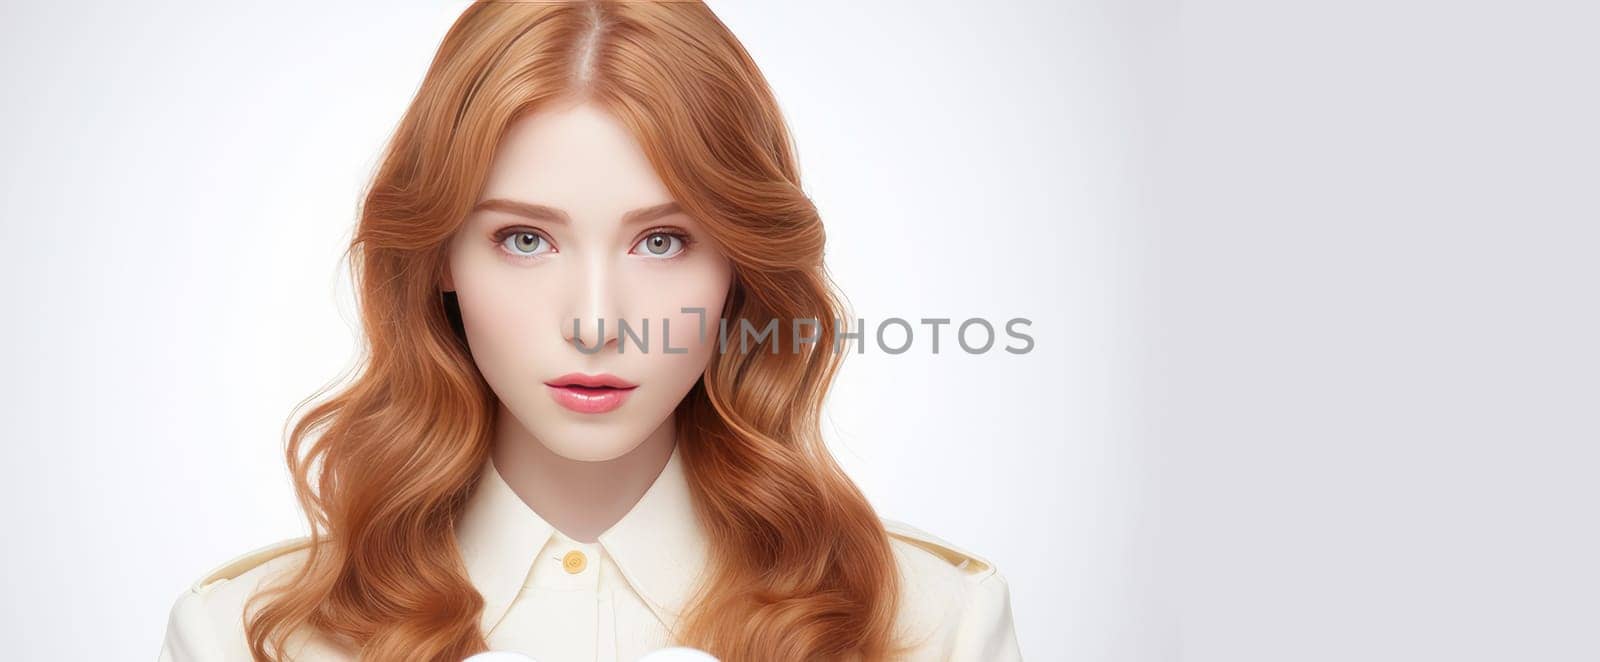 Young girl on a white background by Alla_Yurtayeva